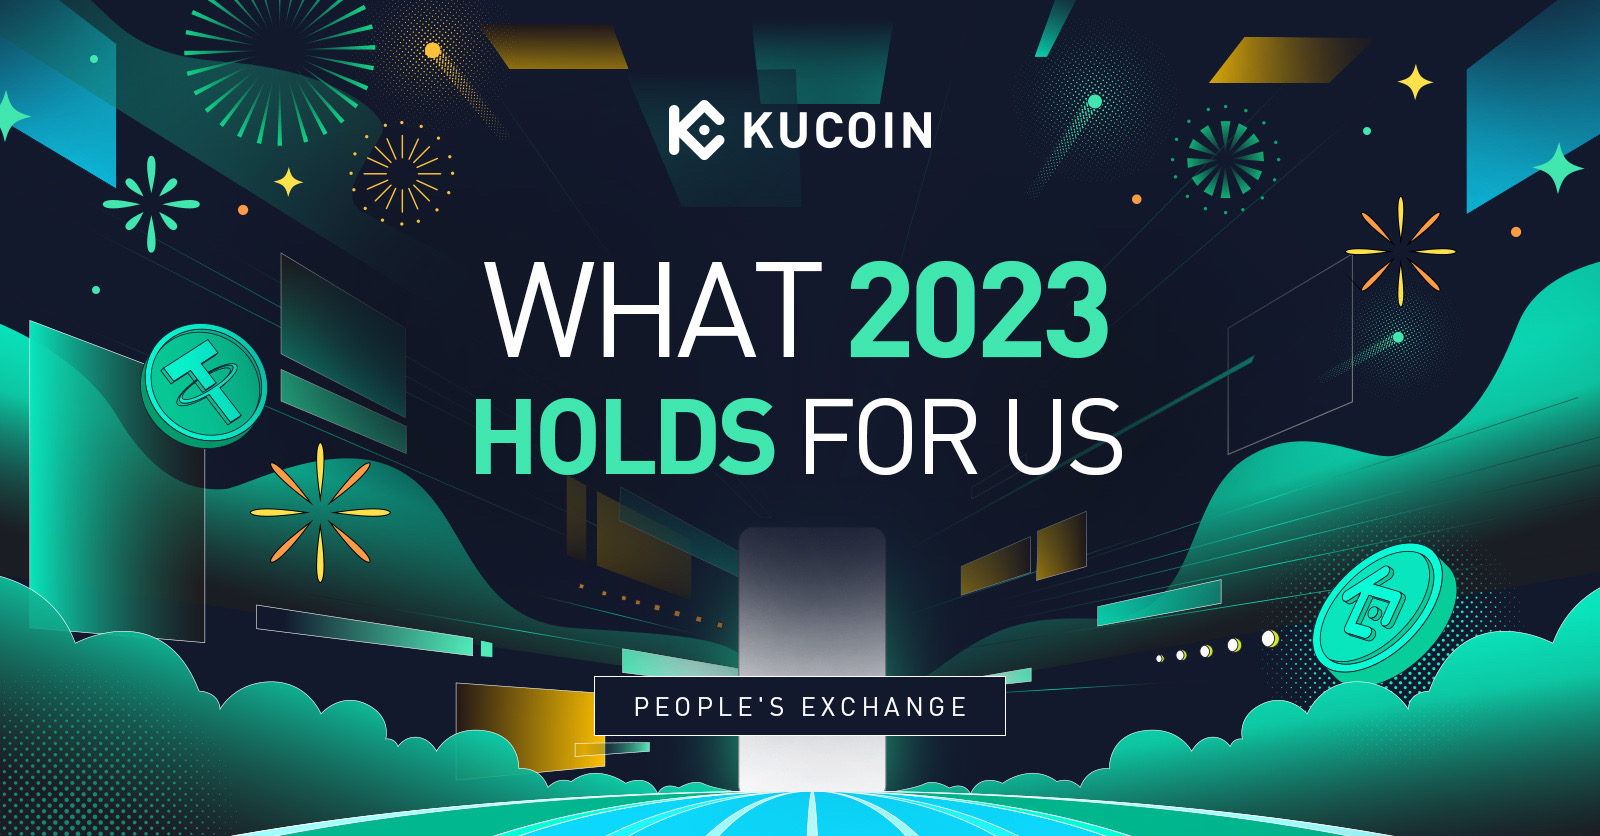 How to Access KuCoin From the US — Complete Guide